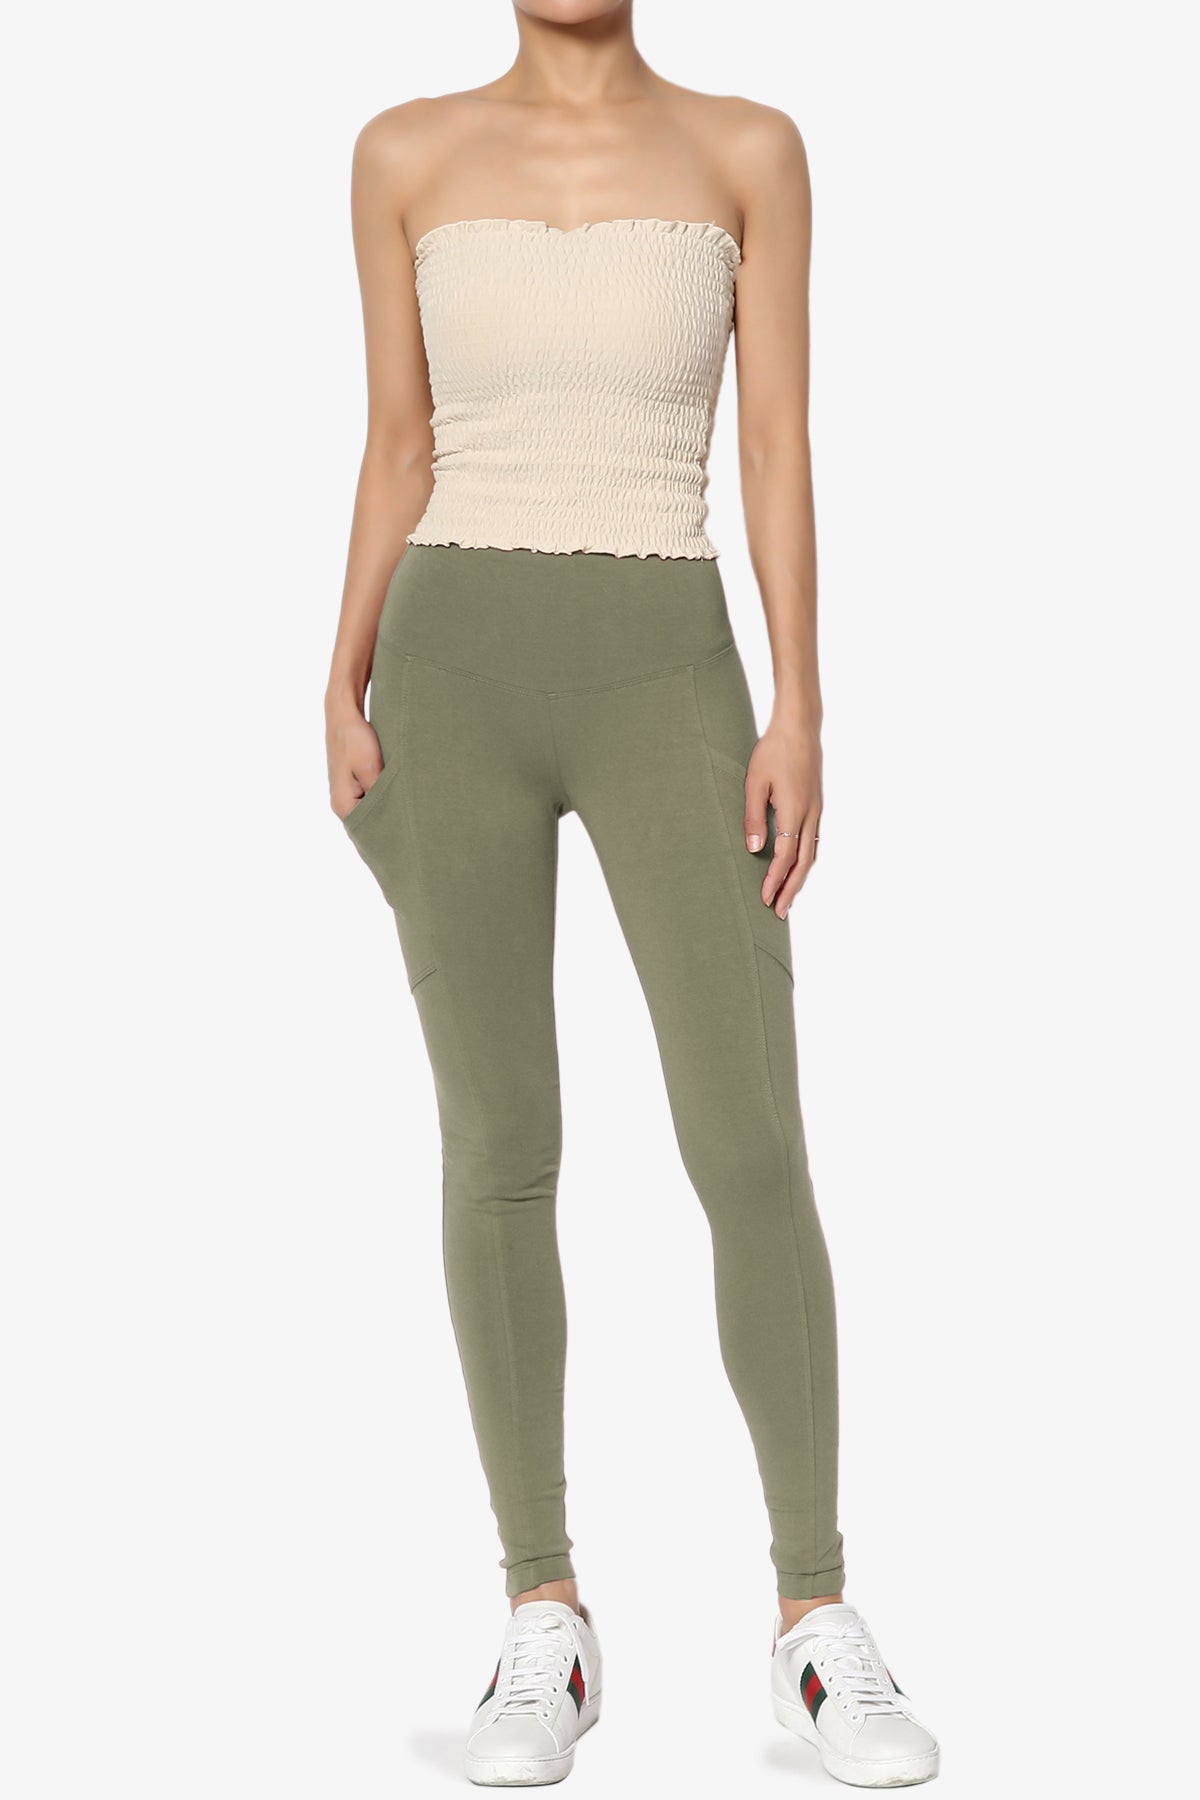 Ansley Luxe Cotton Leggings with Pockets DUSTY OLIVE_6